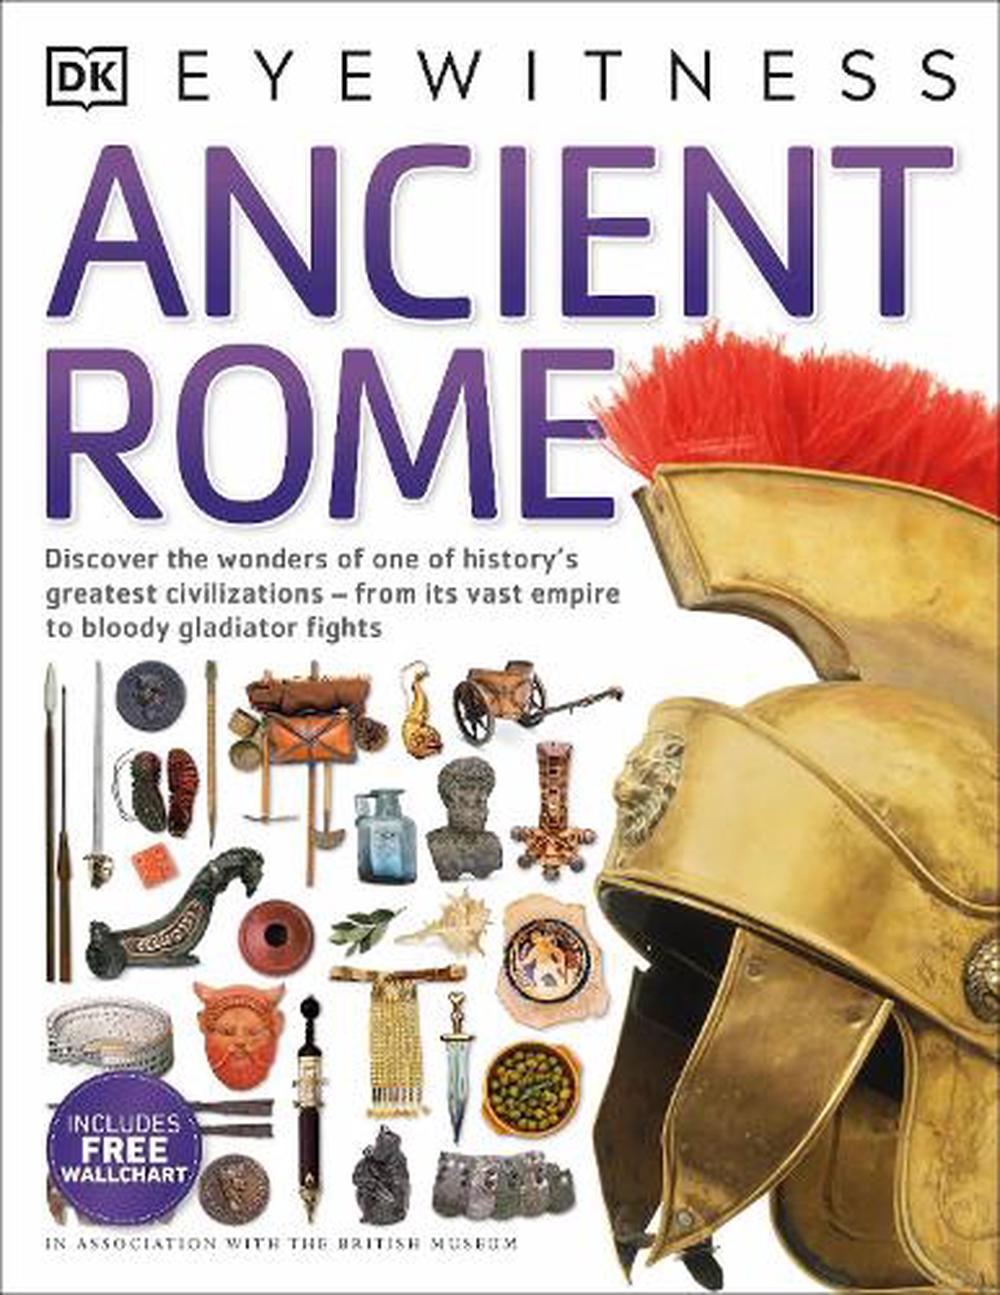 Ancient Rome By Dk English Paperback Book Free Shipping 9780241187753 Ebay 